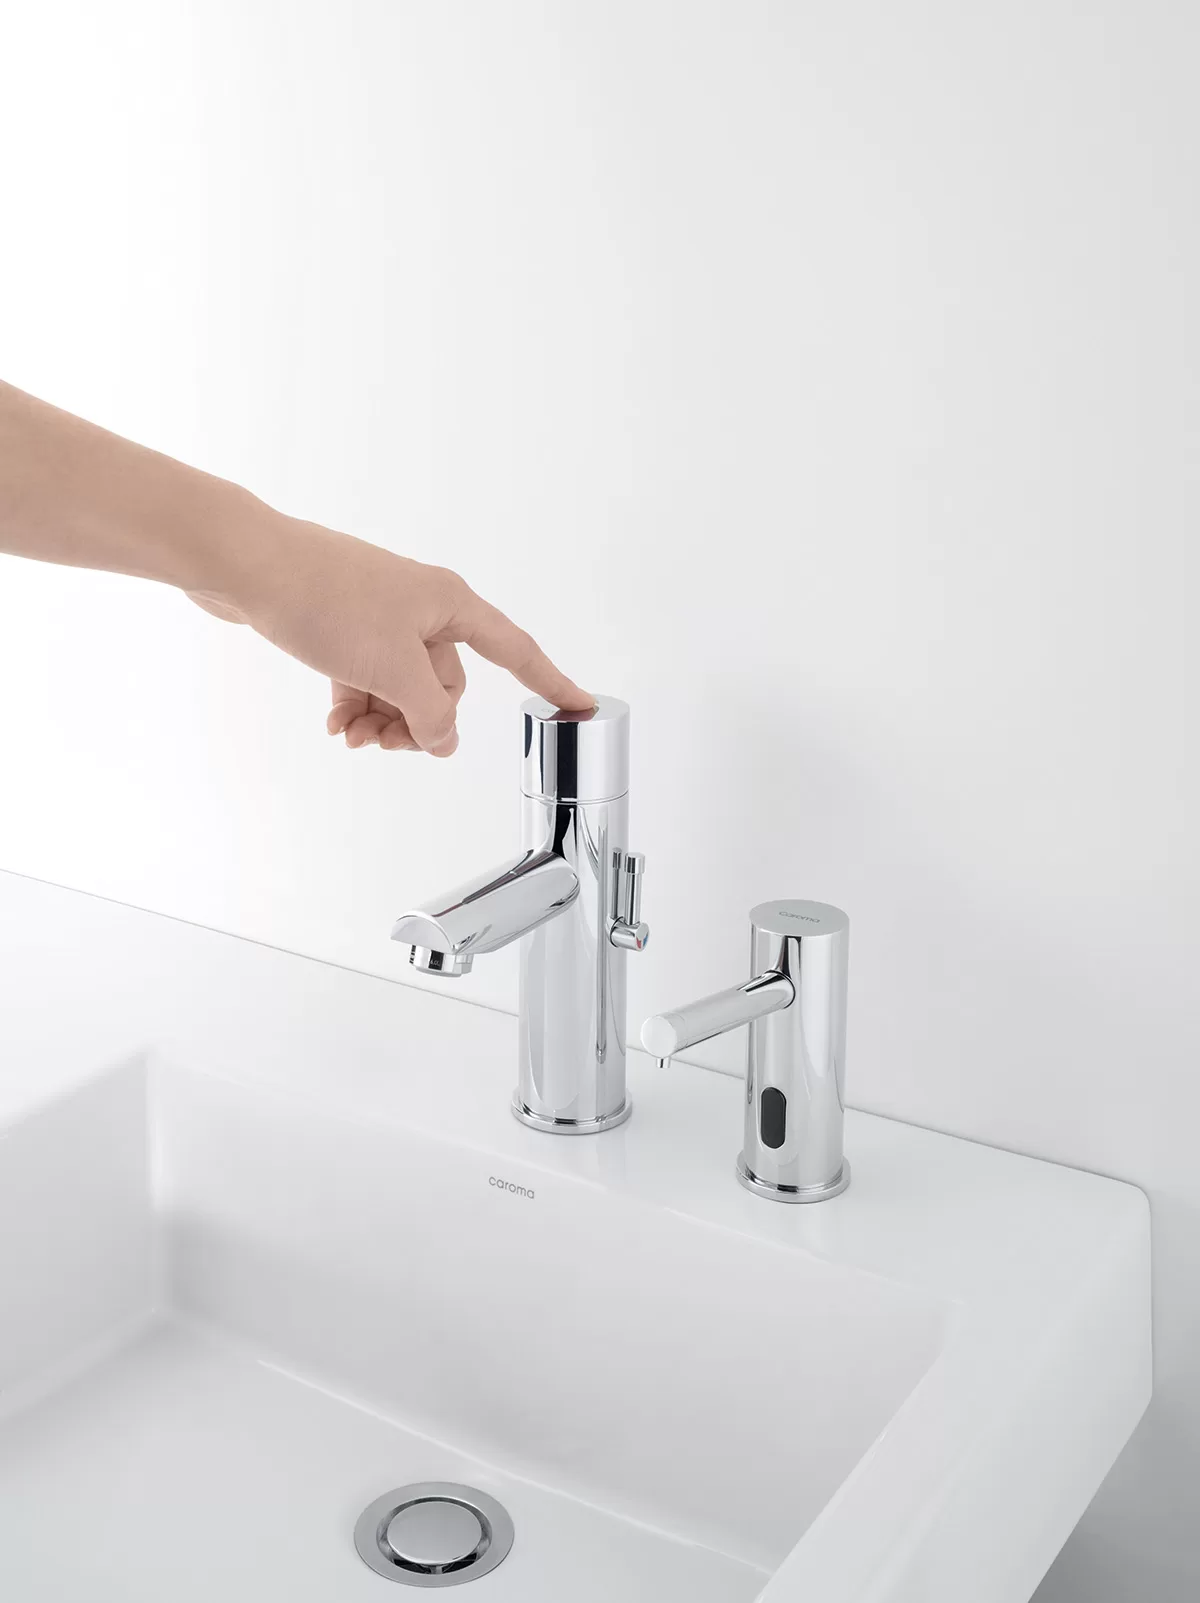 G-Series Electronic Touch Basin Mixer (Adjustable Temperature) with G-Series Electronic Hands-free Soap Dispenser